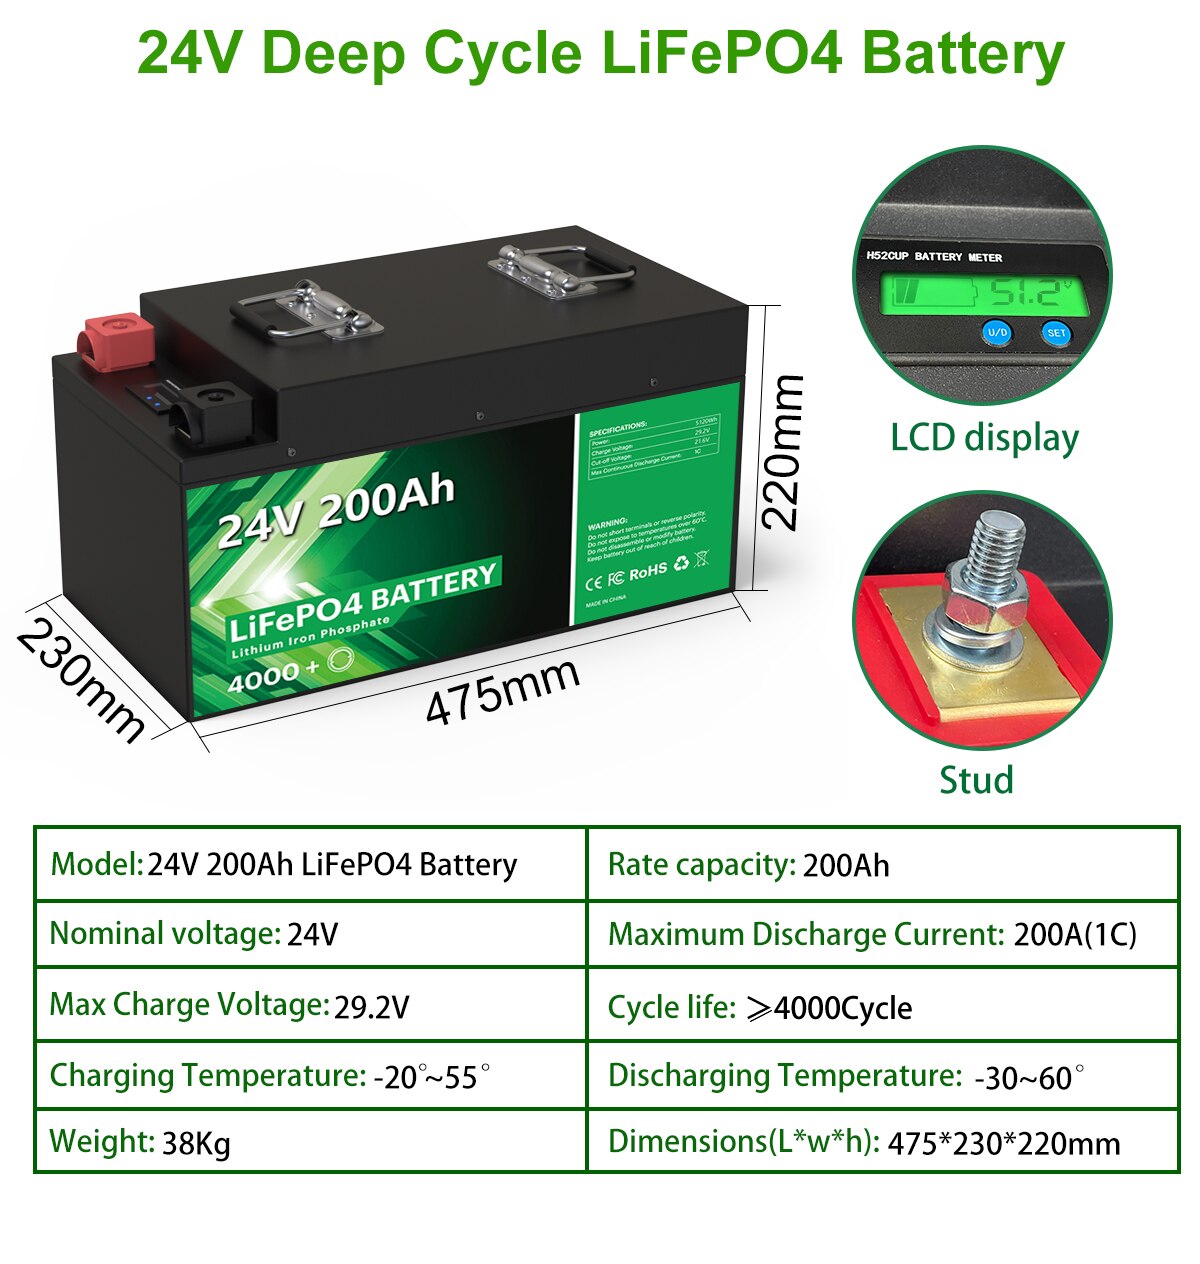 LiFePO4 24V 300Ah 200Ah 100Ah Battery Pack - 6000 Cycles 25.6V 7680Wh 8S 200A BMS RV Golf Cart Rechargeable Lithium Battery No Tax